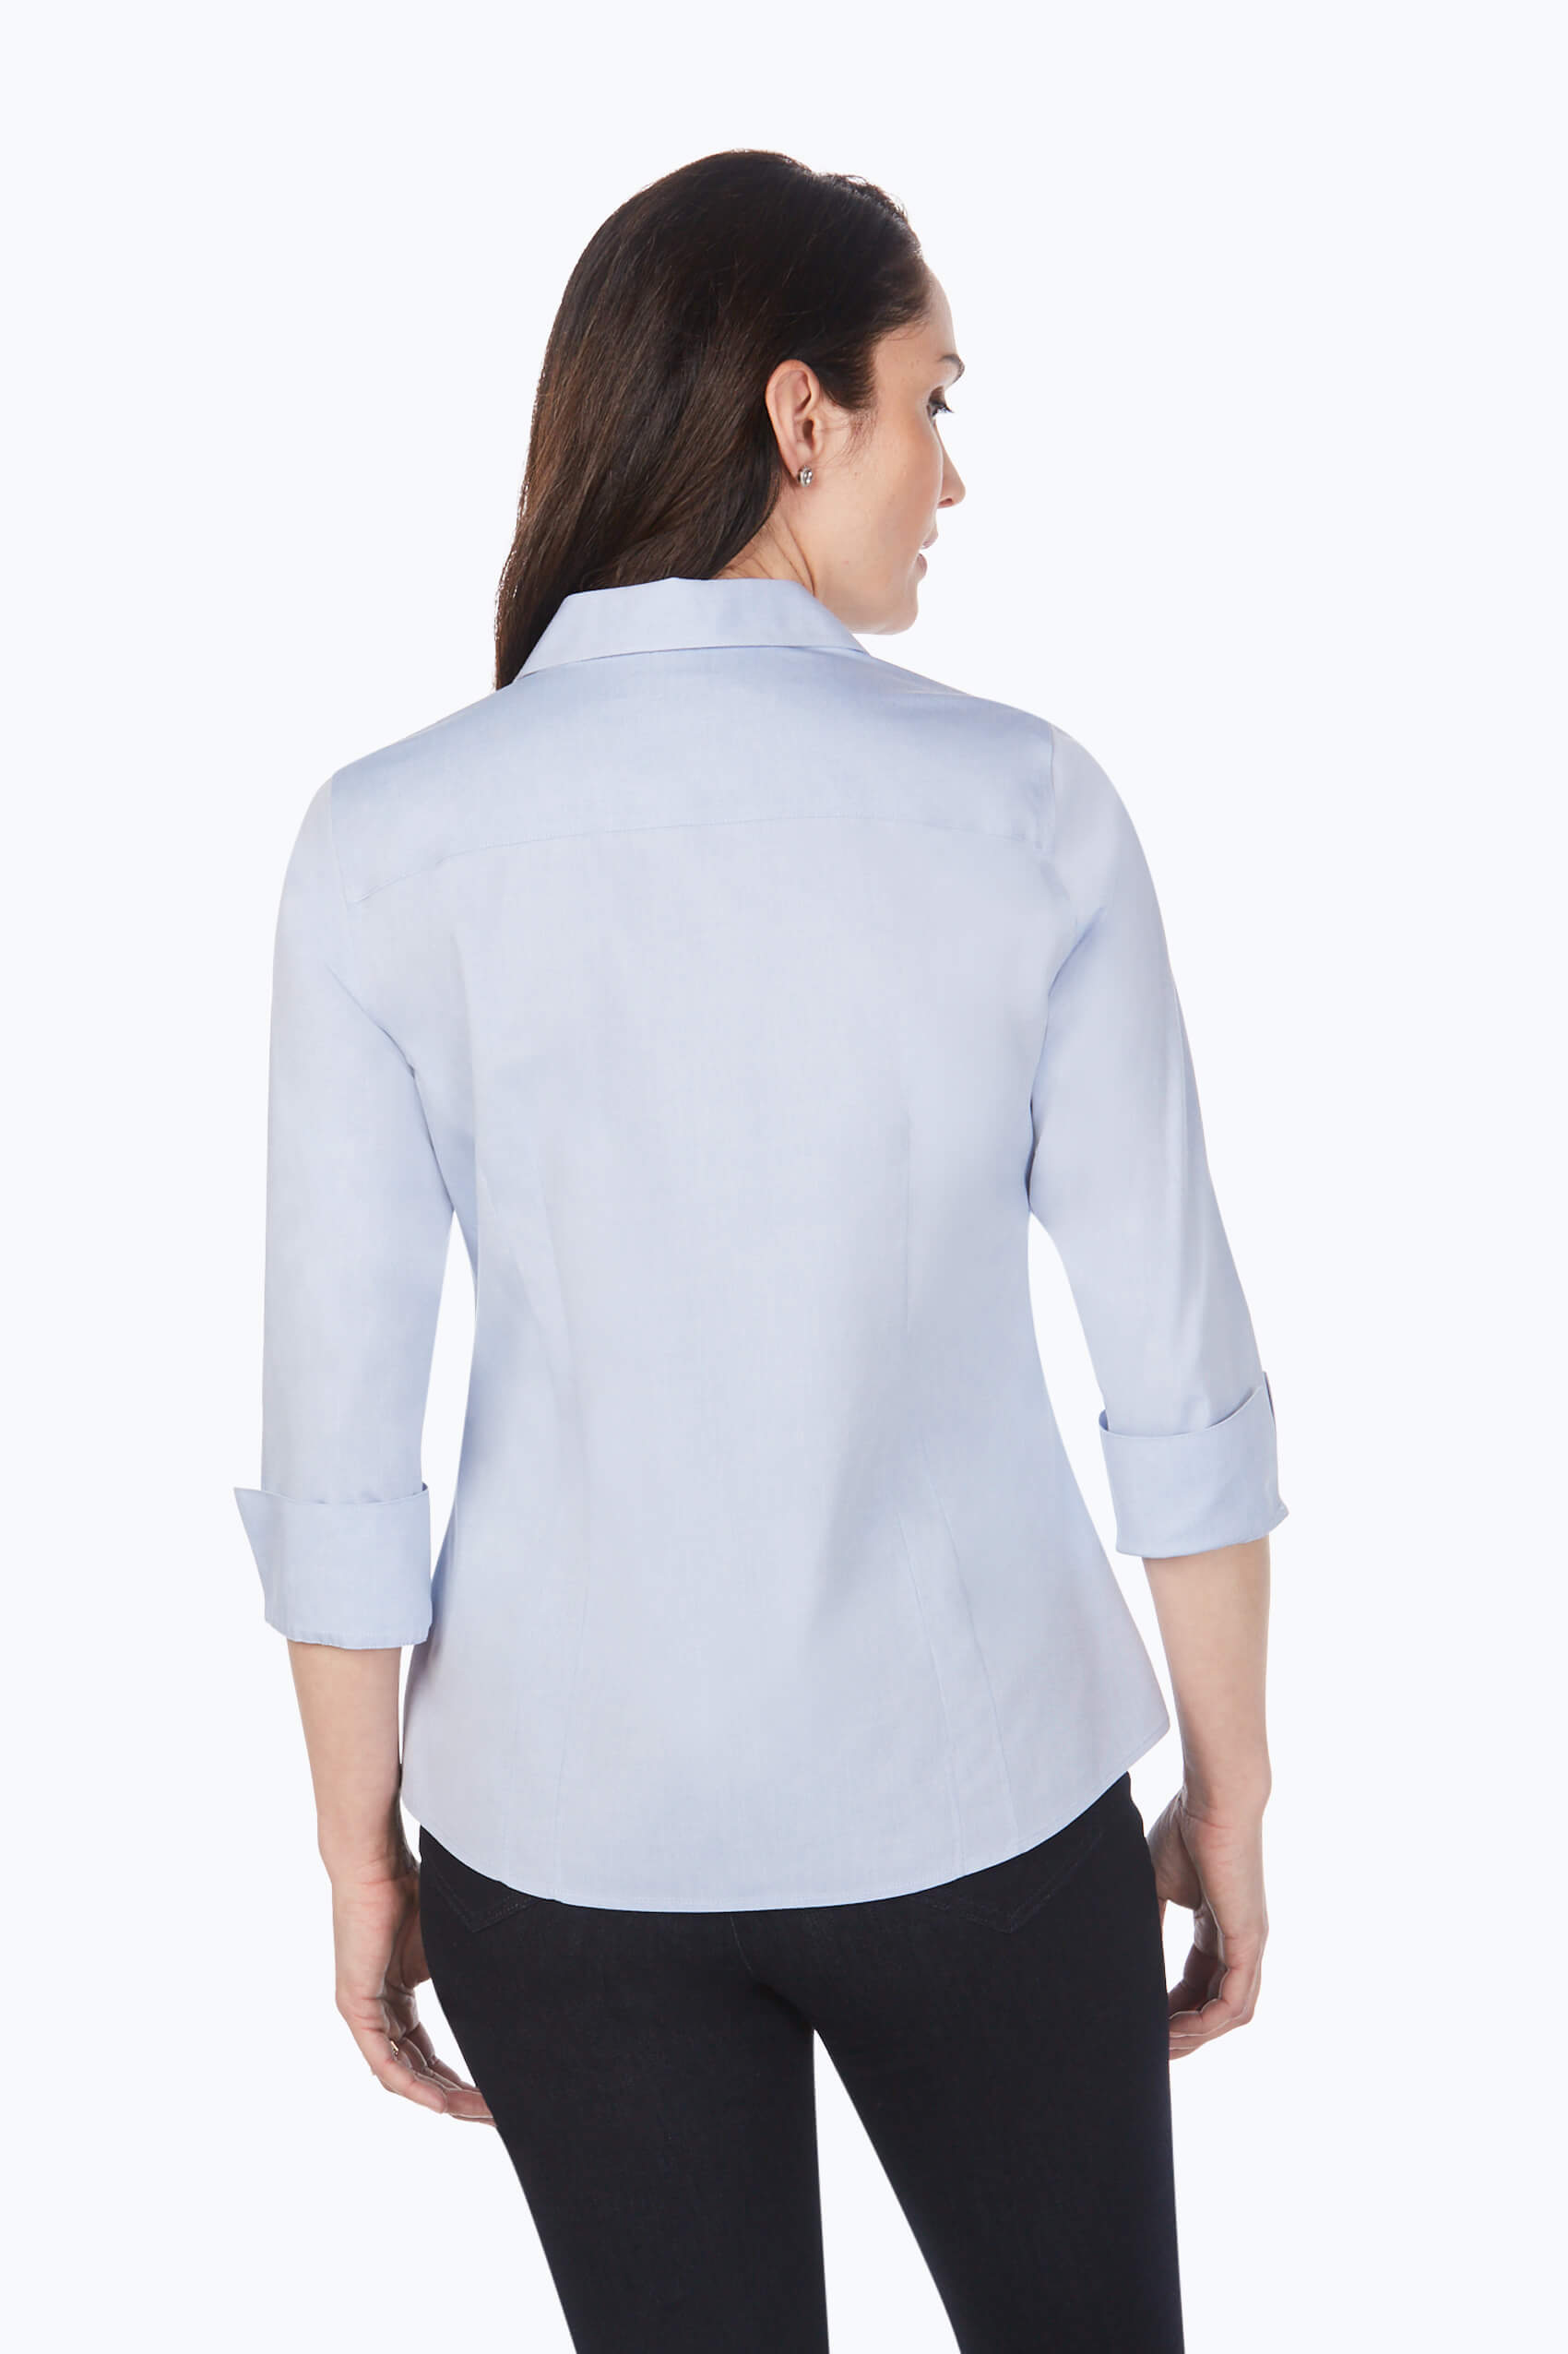 Taylor Essential Pinpoint Non-Iron Shirt